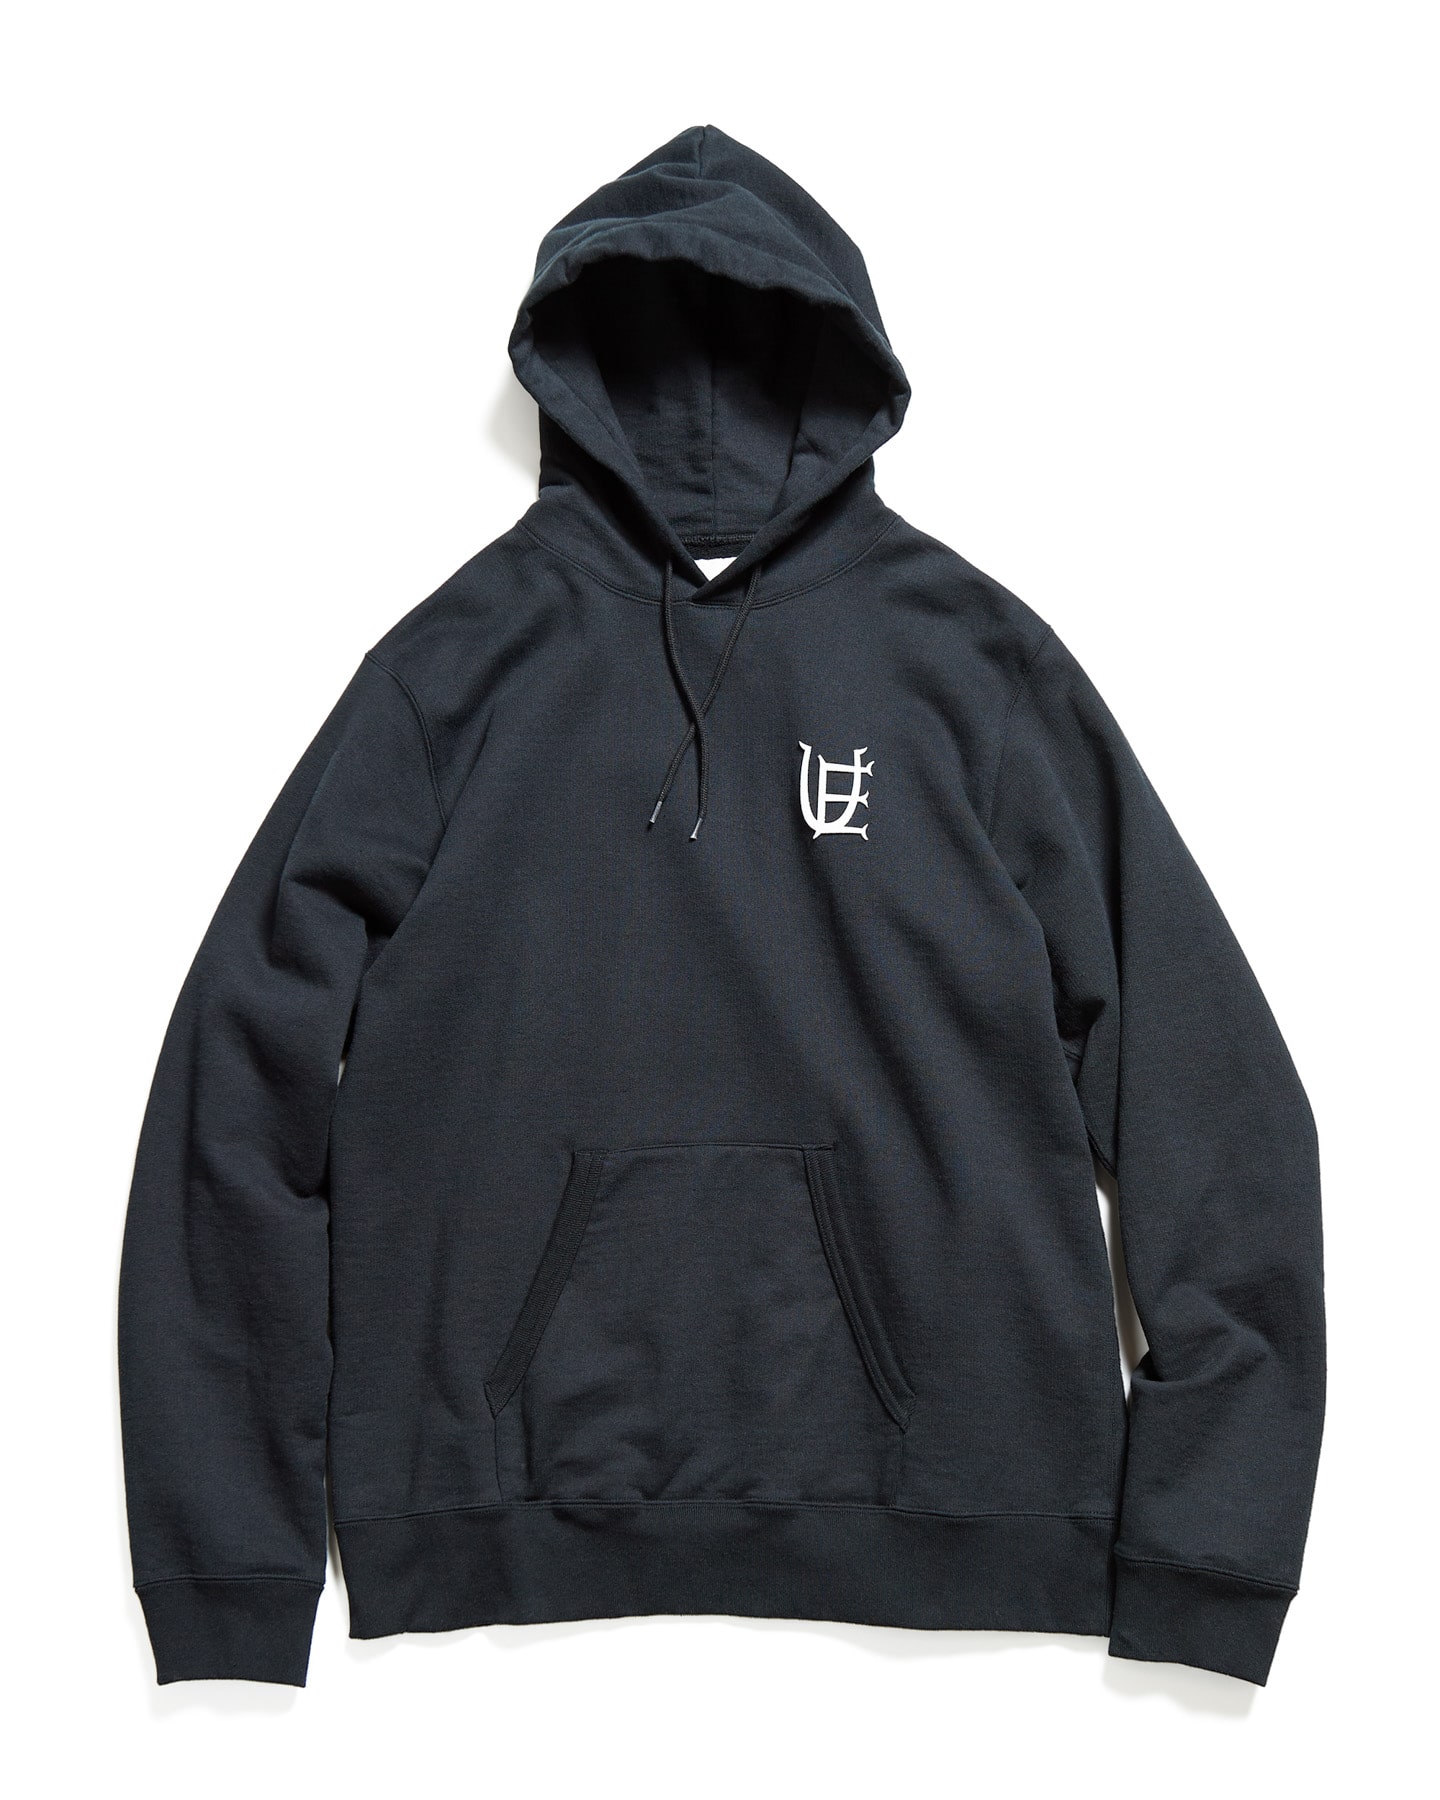 FCRB AUTHENTIC LOGO SWEAT HOODIE